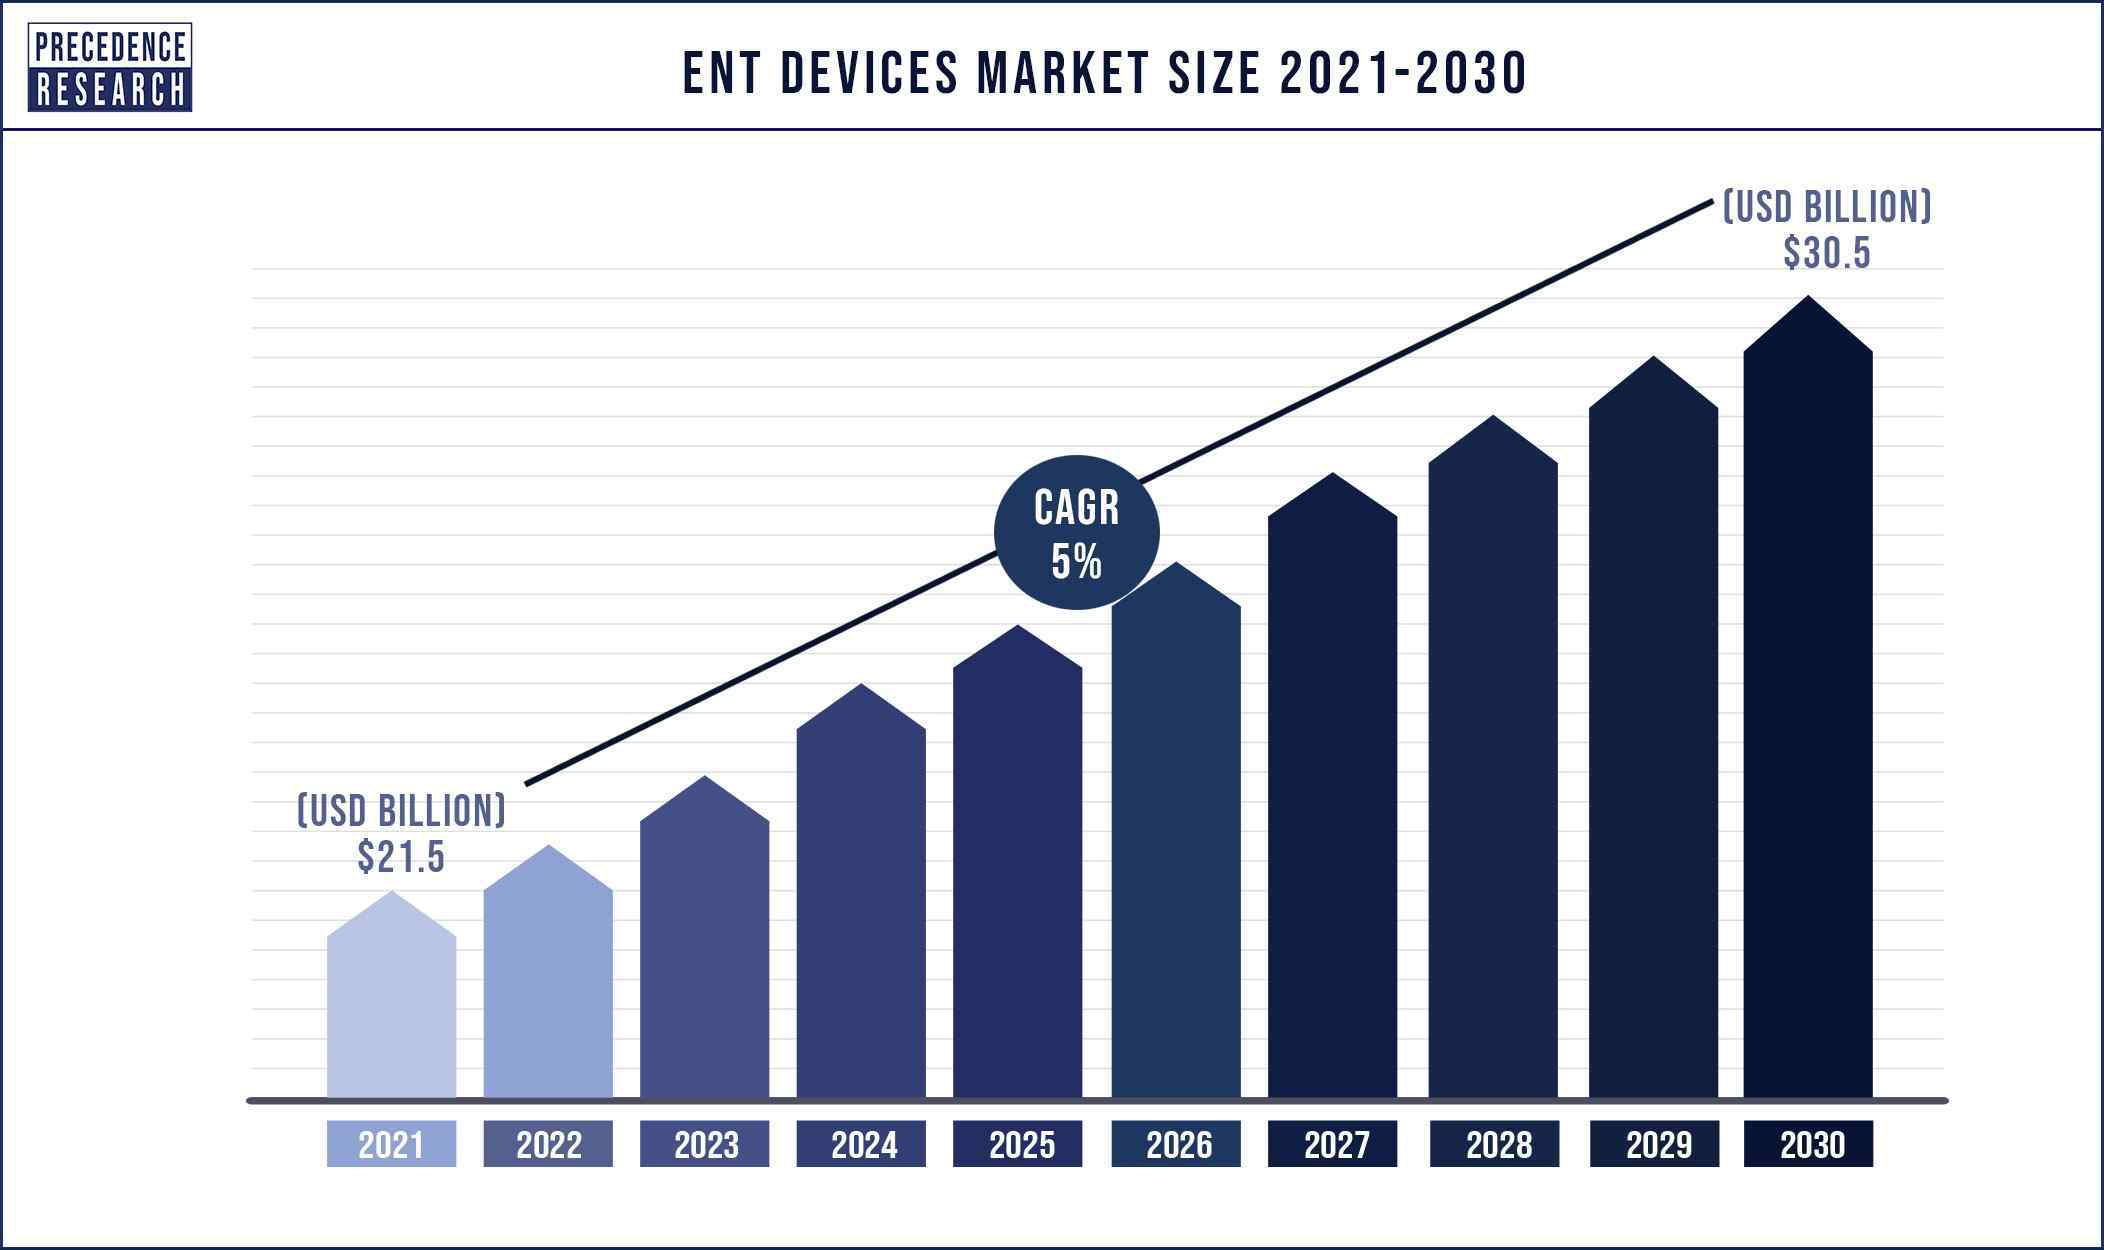 ENT Devices Market Size 2021 to 2030